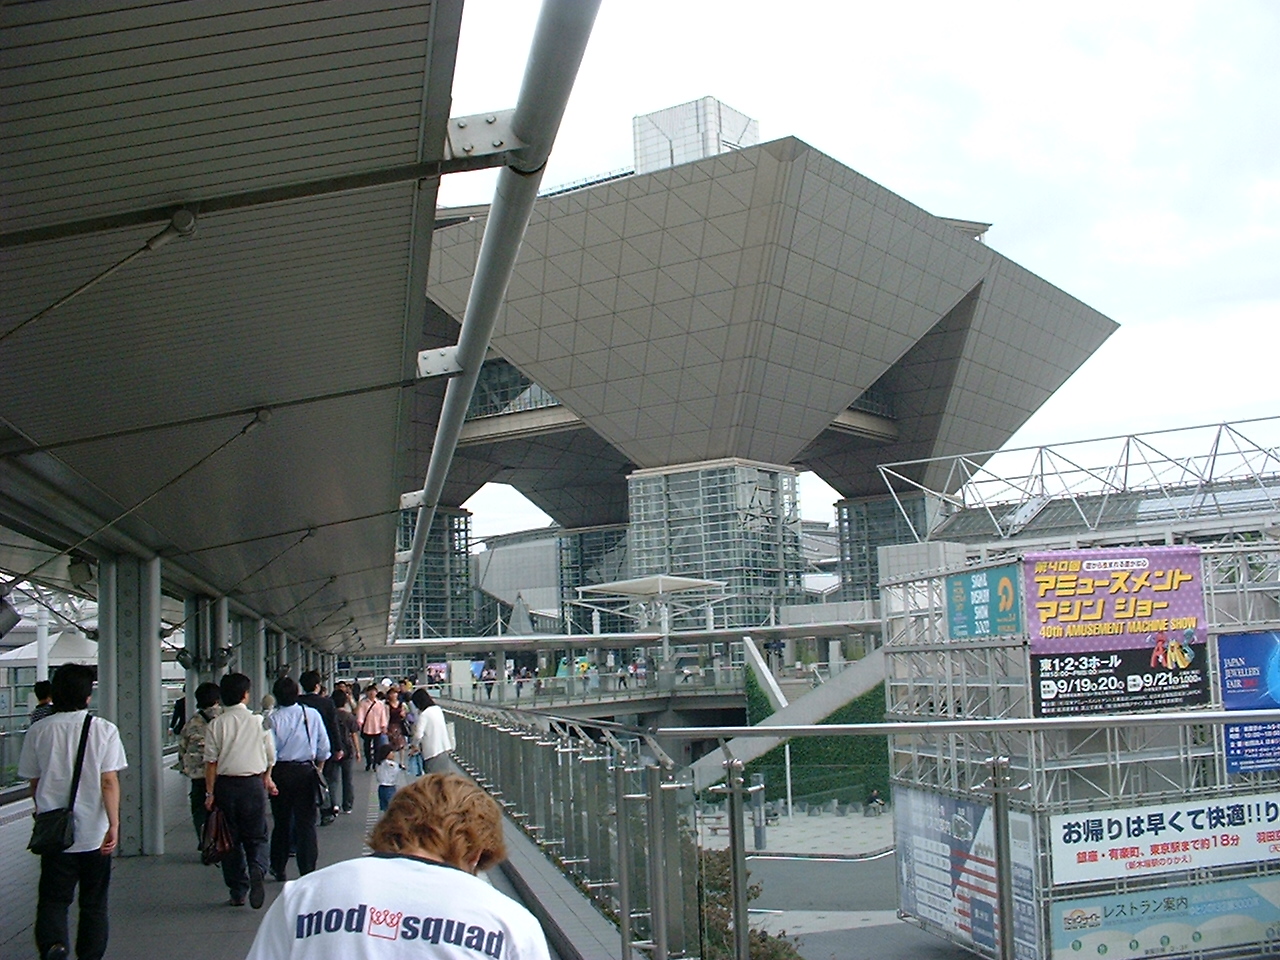 people on a walkway to a building with inverted triangular structures